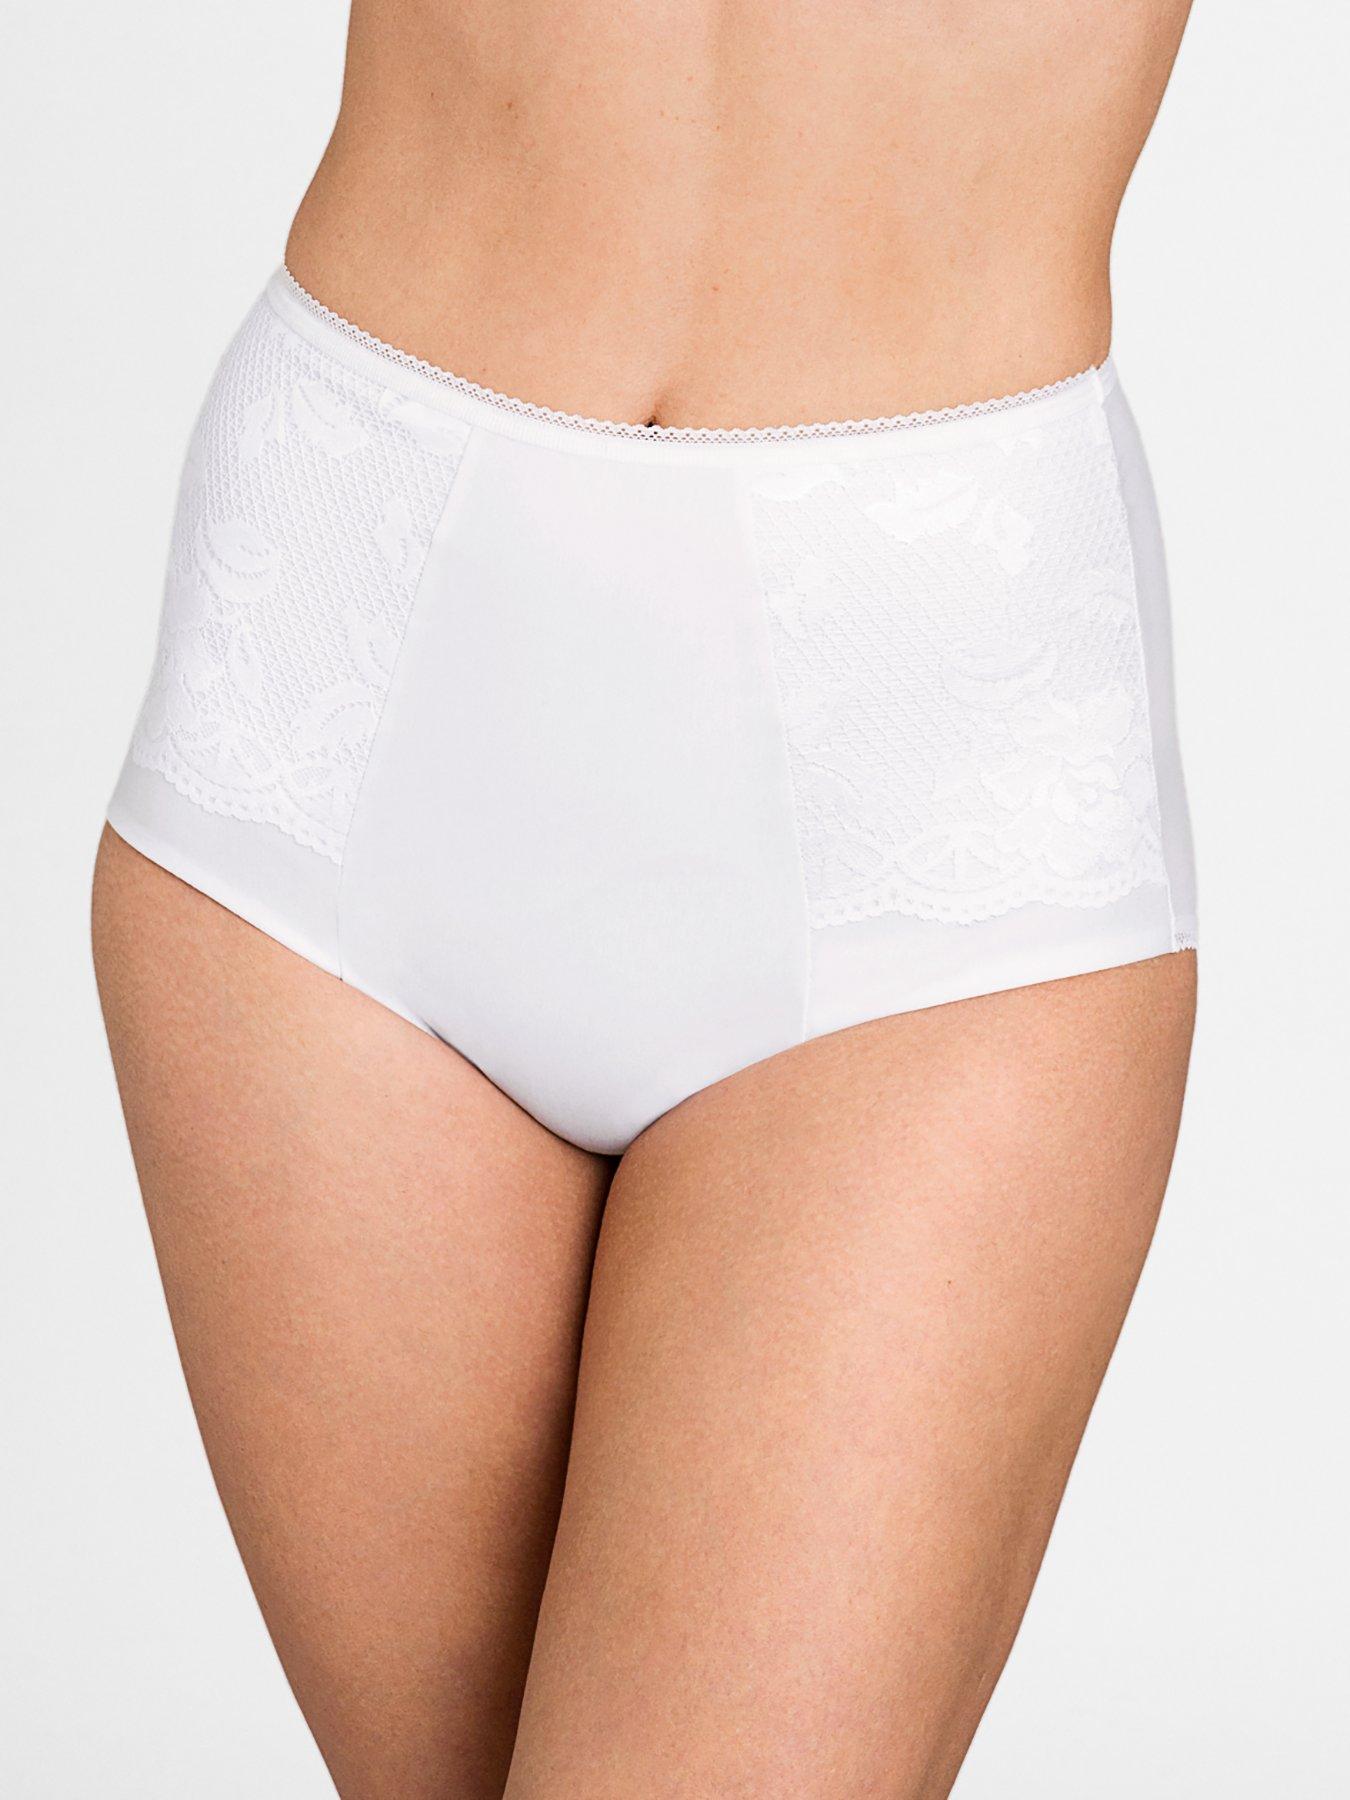 Miss Mary of Sweden Lovely Lace Panty Girdle - White